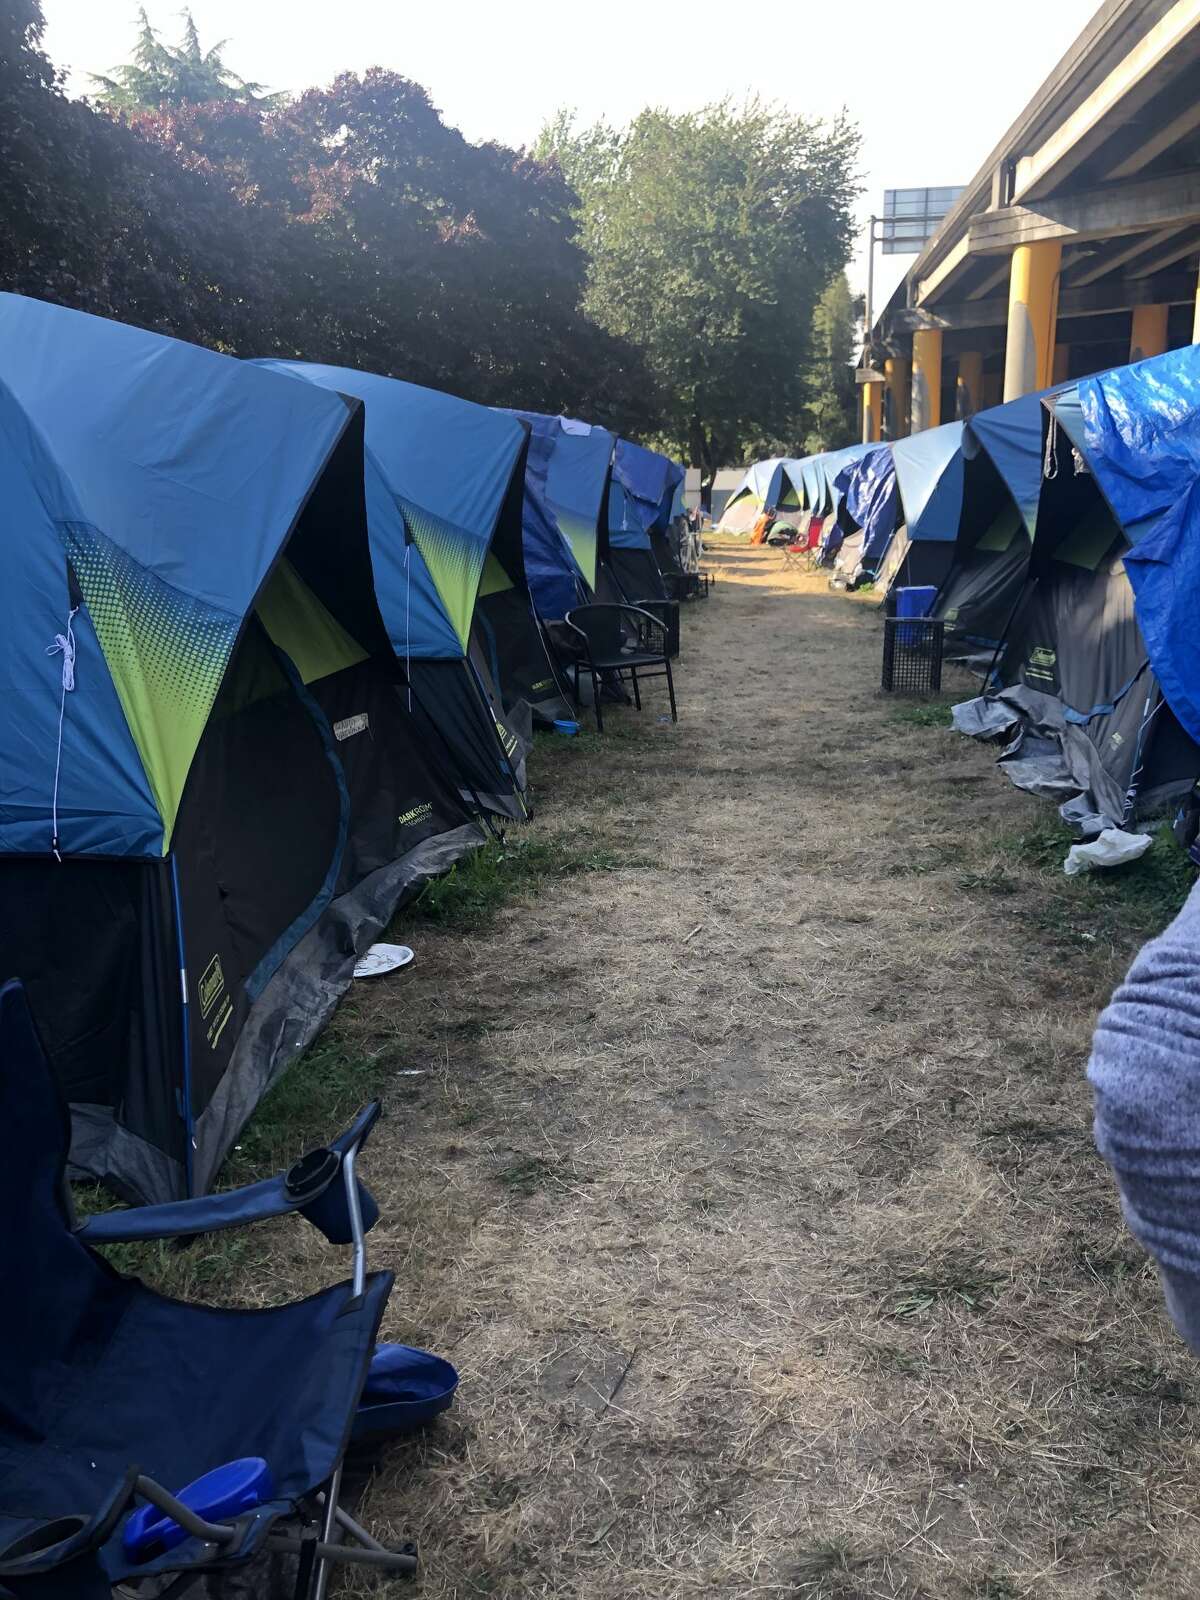 The number of people experiencing homelessness has risen by thousands over the past decade. According to the Point-in-Time count, the number of people who are homeless in King County began rising in 2012. It dropped slightly in 2019, which found that just more than 11,000 people were experiencing homelessness on a given night, and more than 5,000 were living unsheltered.